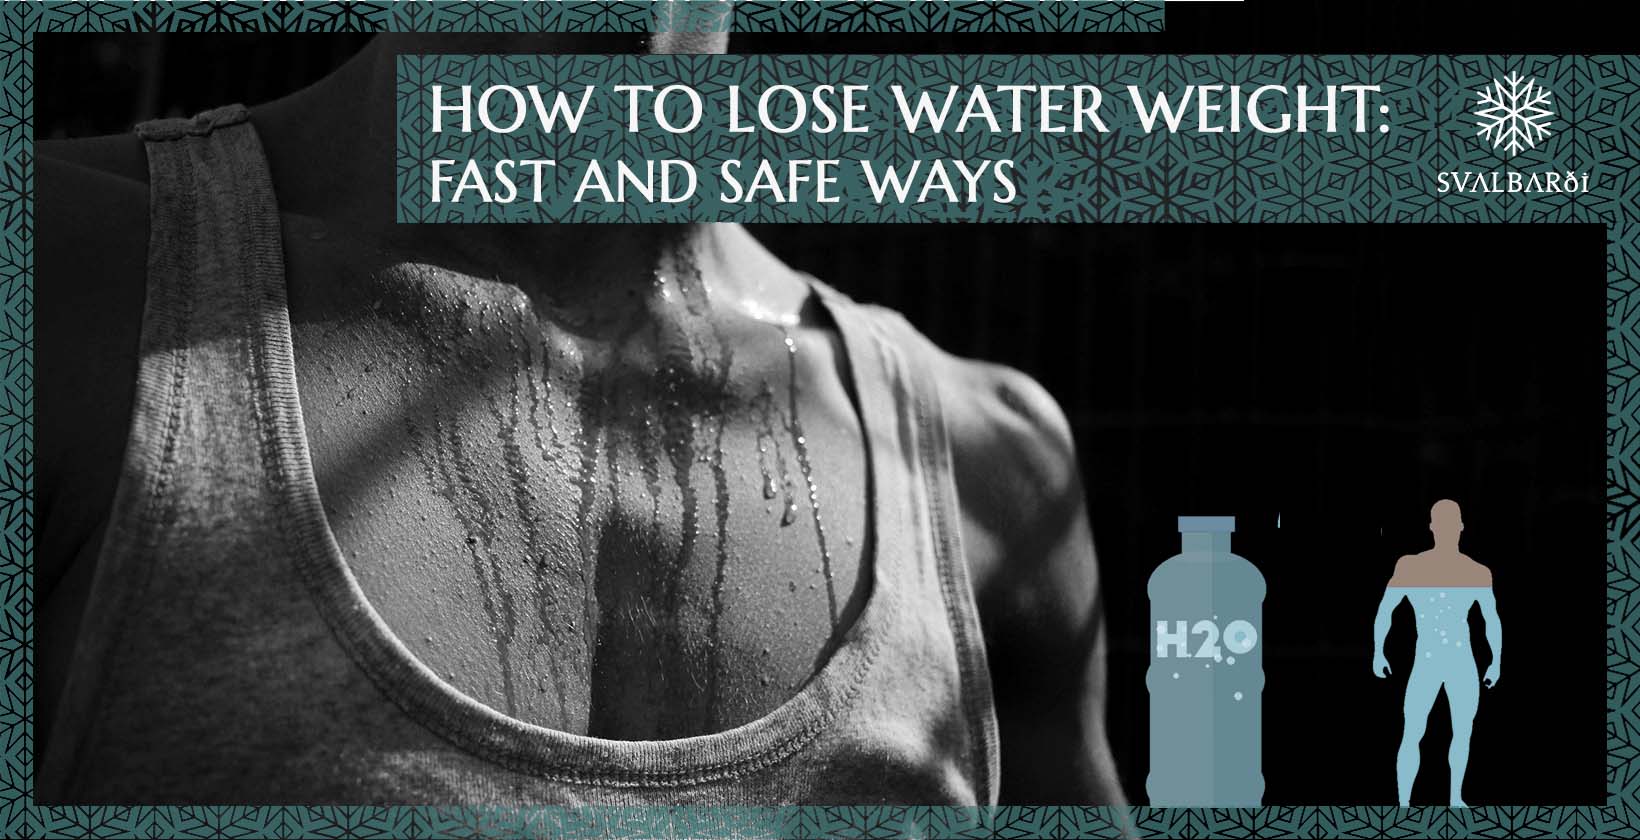 Rapid water weight loss